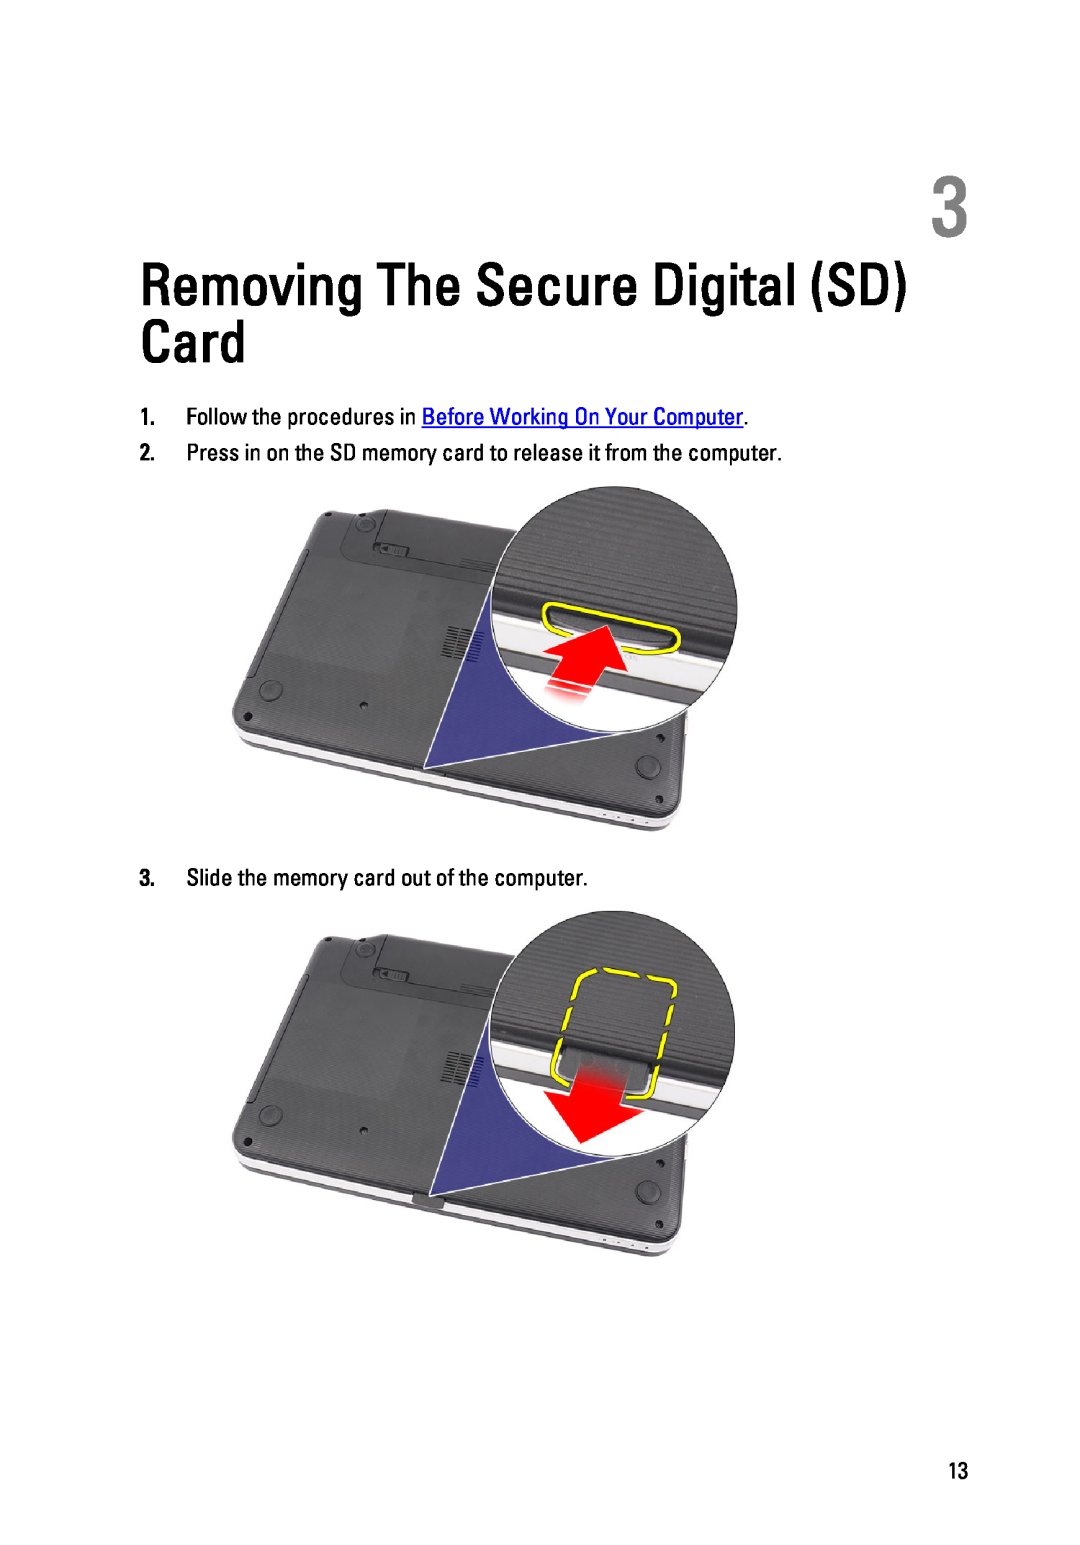 Dell P22G owner manual Removing The Secure Digital SD Card, Press in on the SD memory card to release it from the computer 